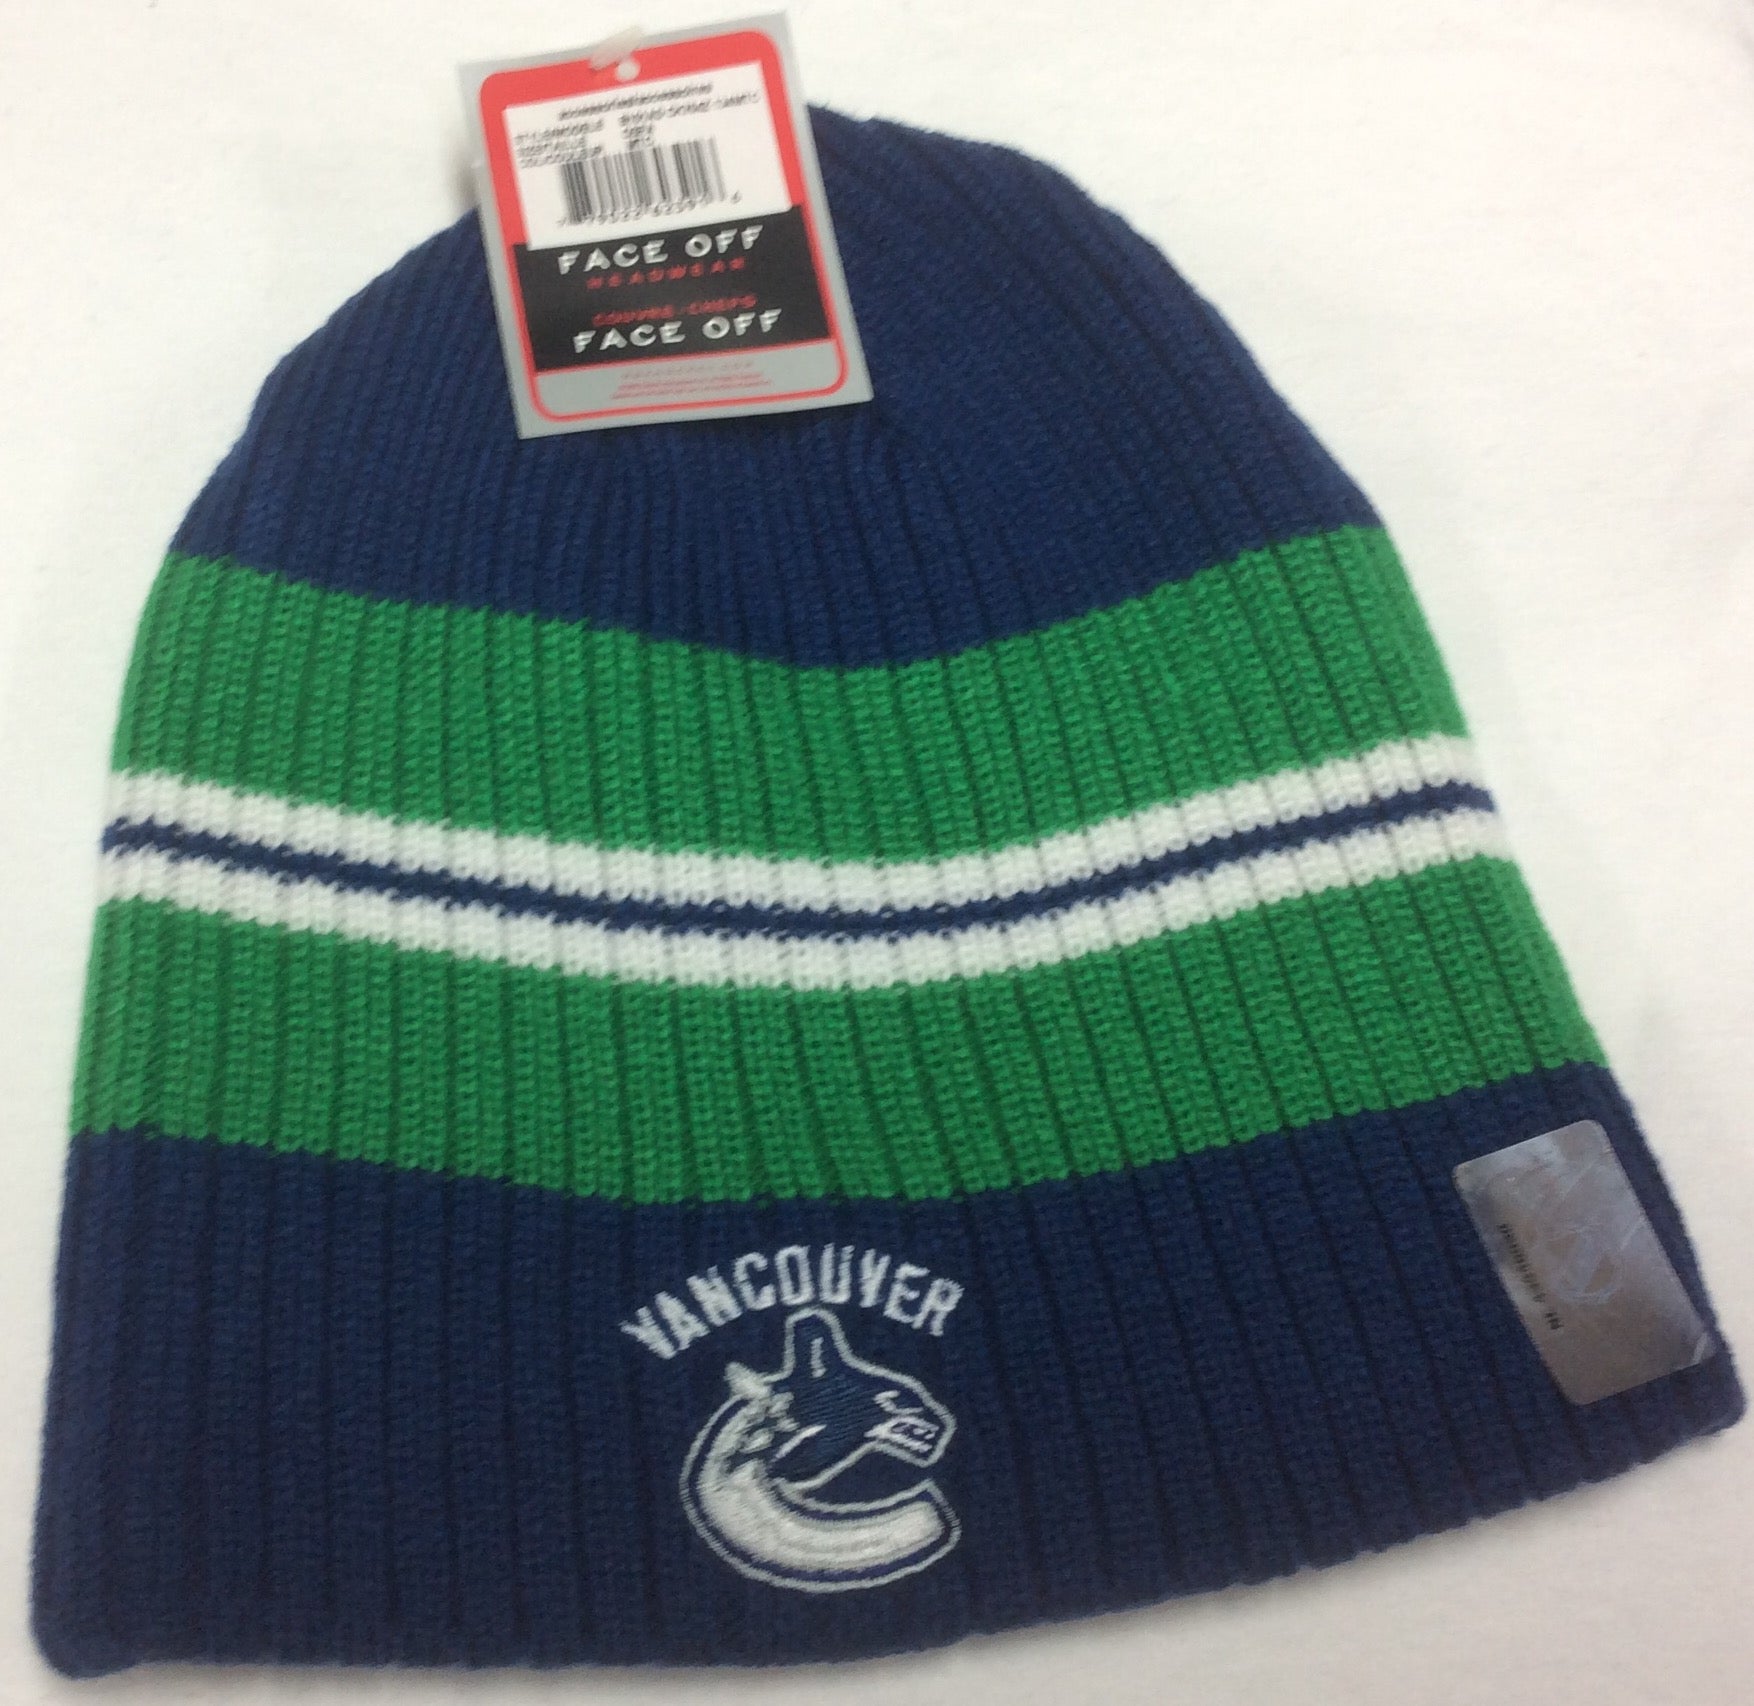 Vancouver Canucks Blue Reebok NHL Watchman Cuffed Knit Hat - Hockey Jersey  Outlet